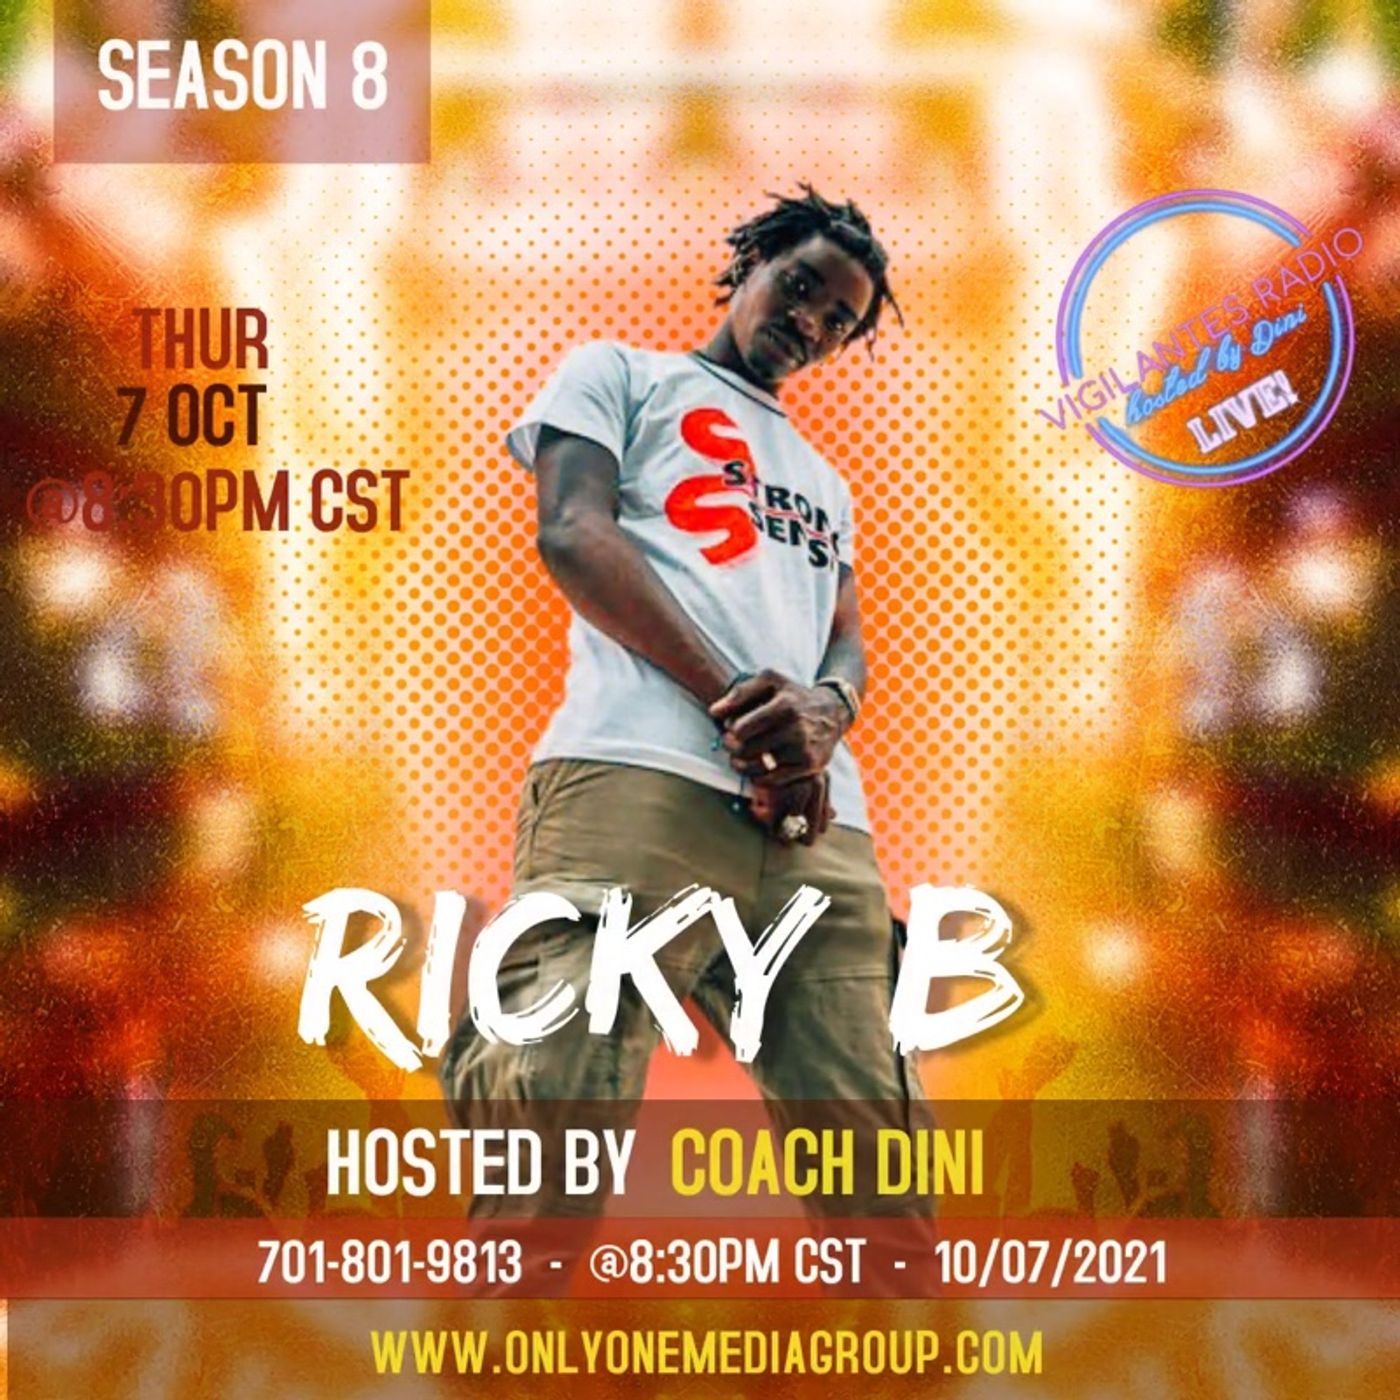 The Ricky B Interview. Image